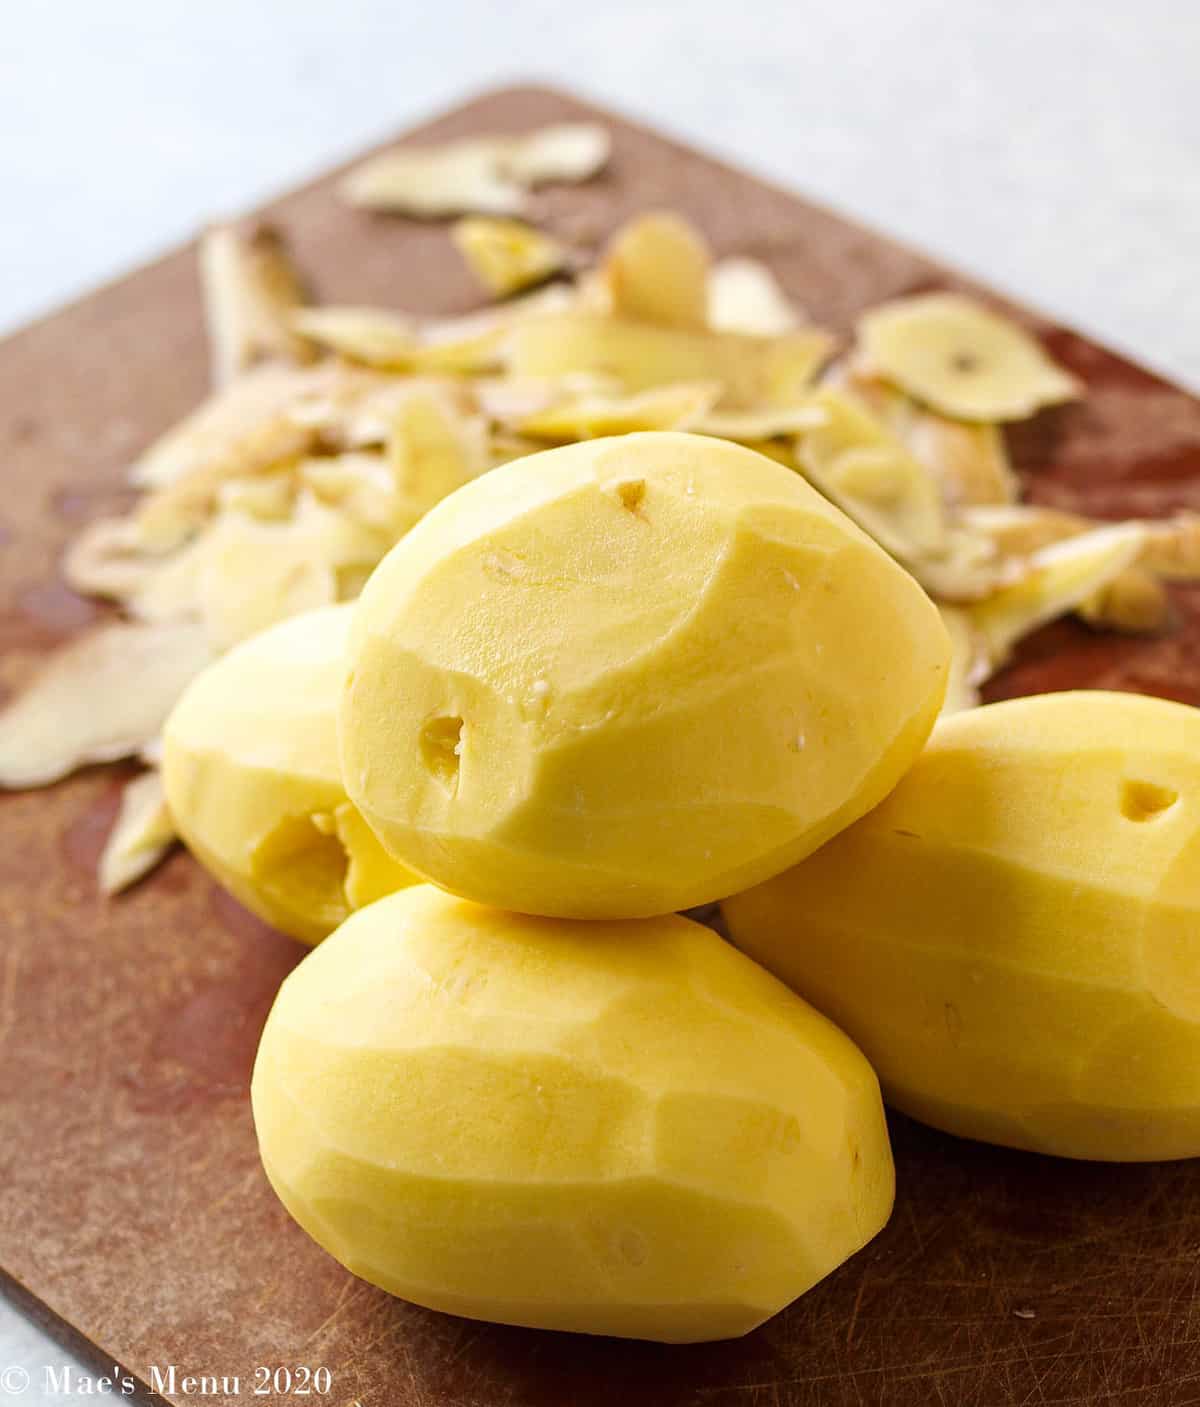 Peeled golden potatoes on a wooden cutting board with potato peels in the background